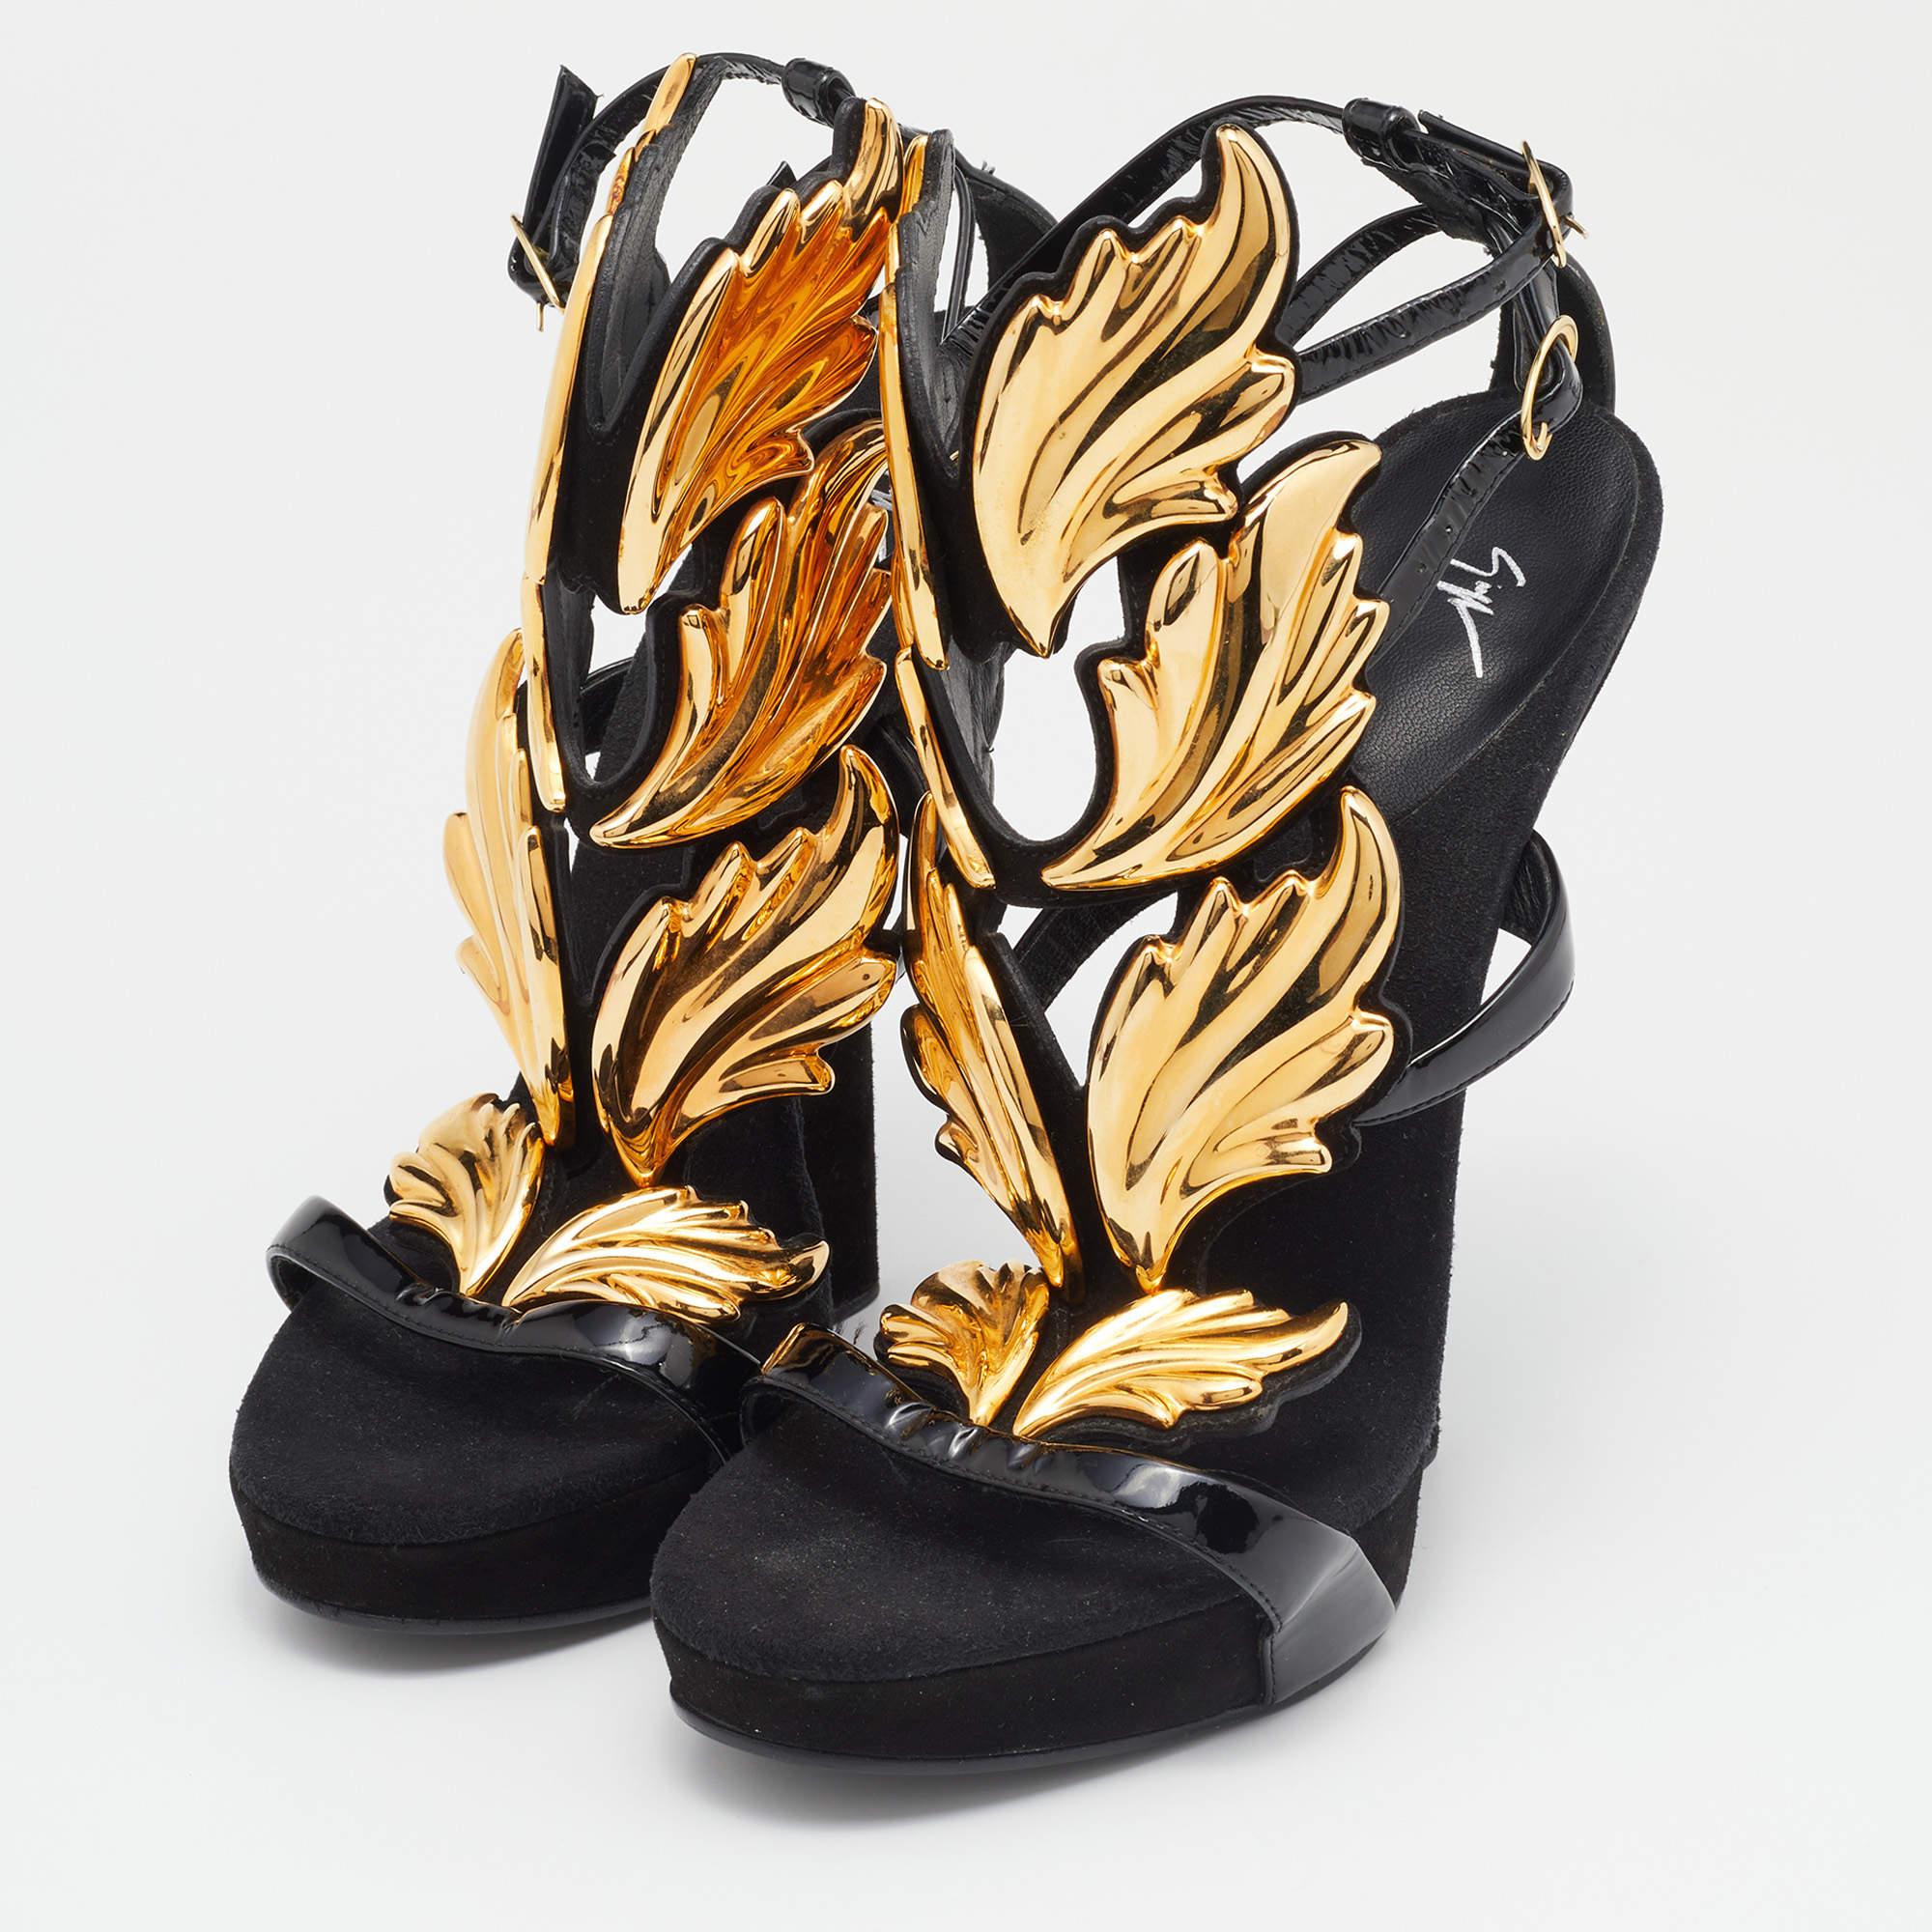 Women's Giuseppe Zanotti Black/Gold Patent Leather and Suede Cruel Summer Sandals Size 3